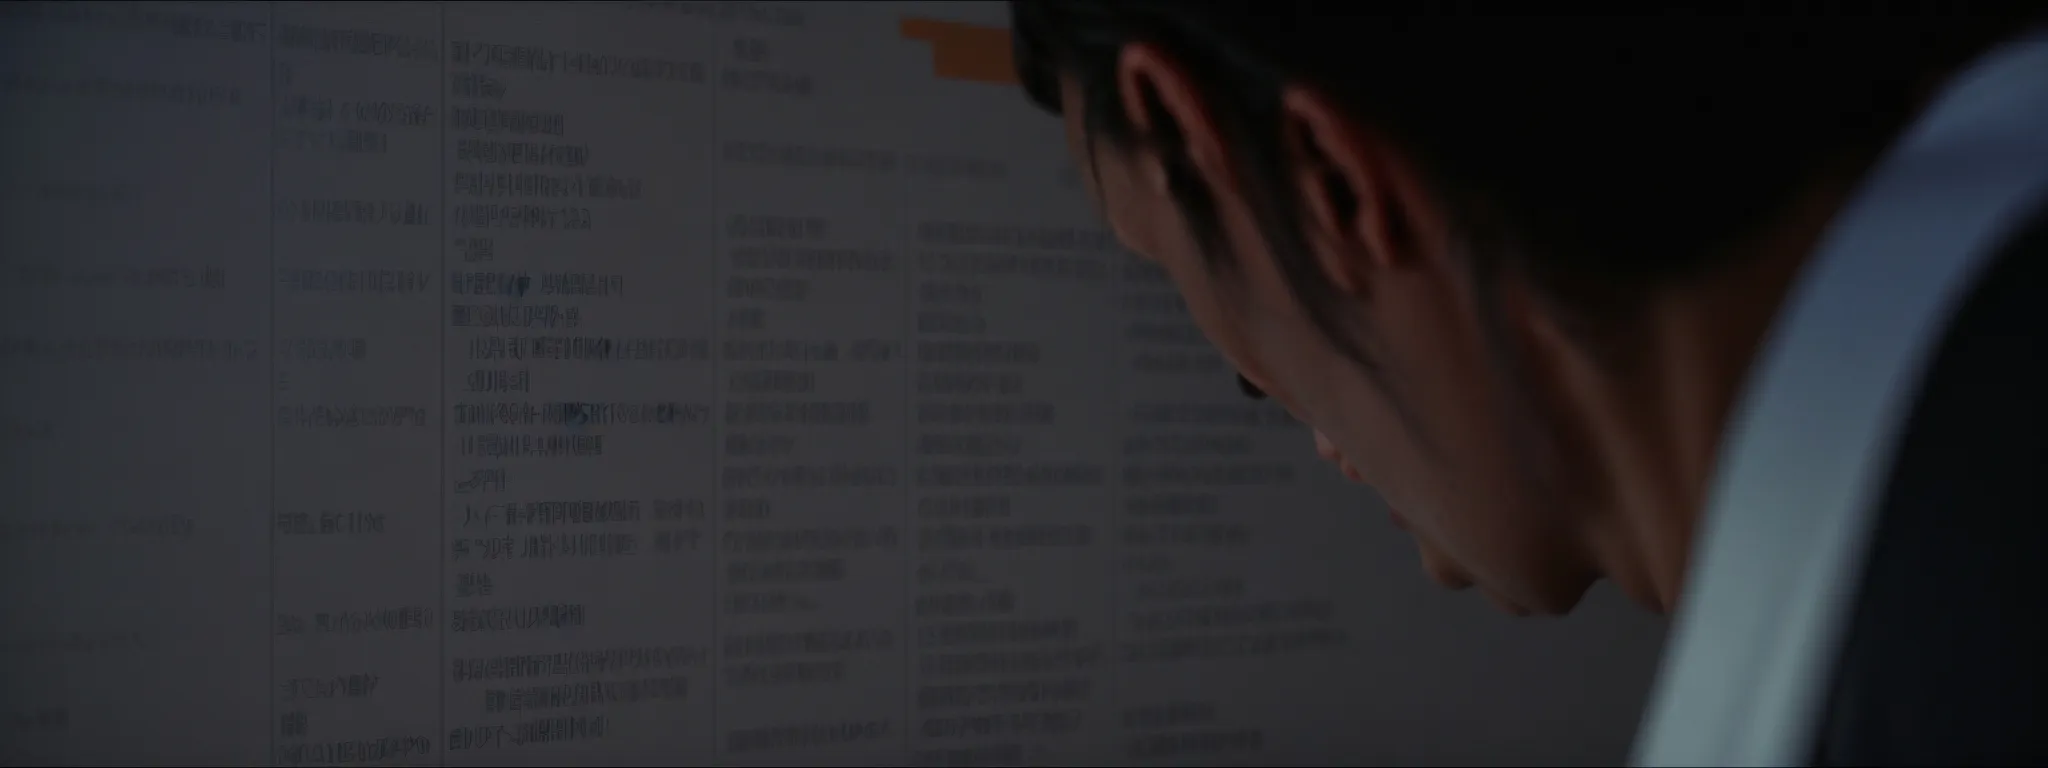 a webmaster attentively examines a computer screen displaying a website's sitemap and broken link error messages.